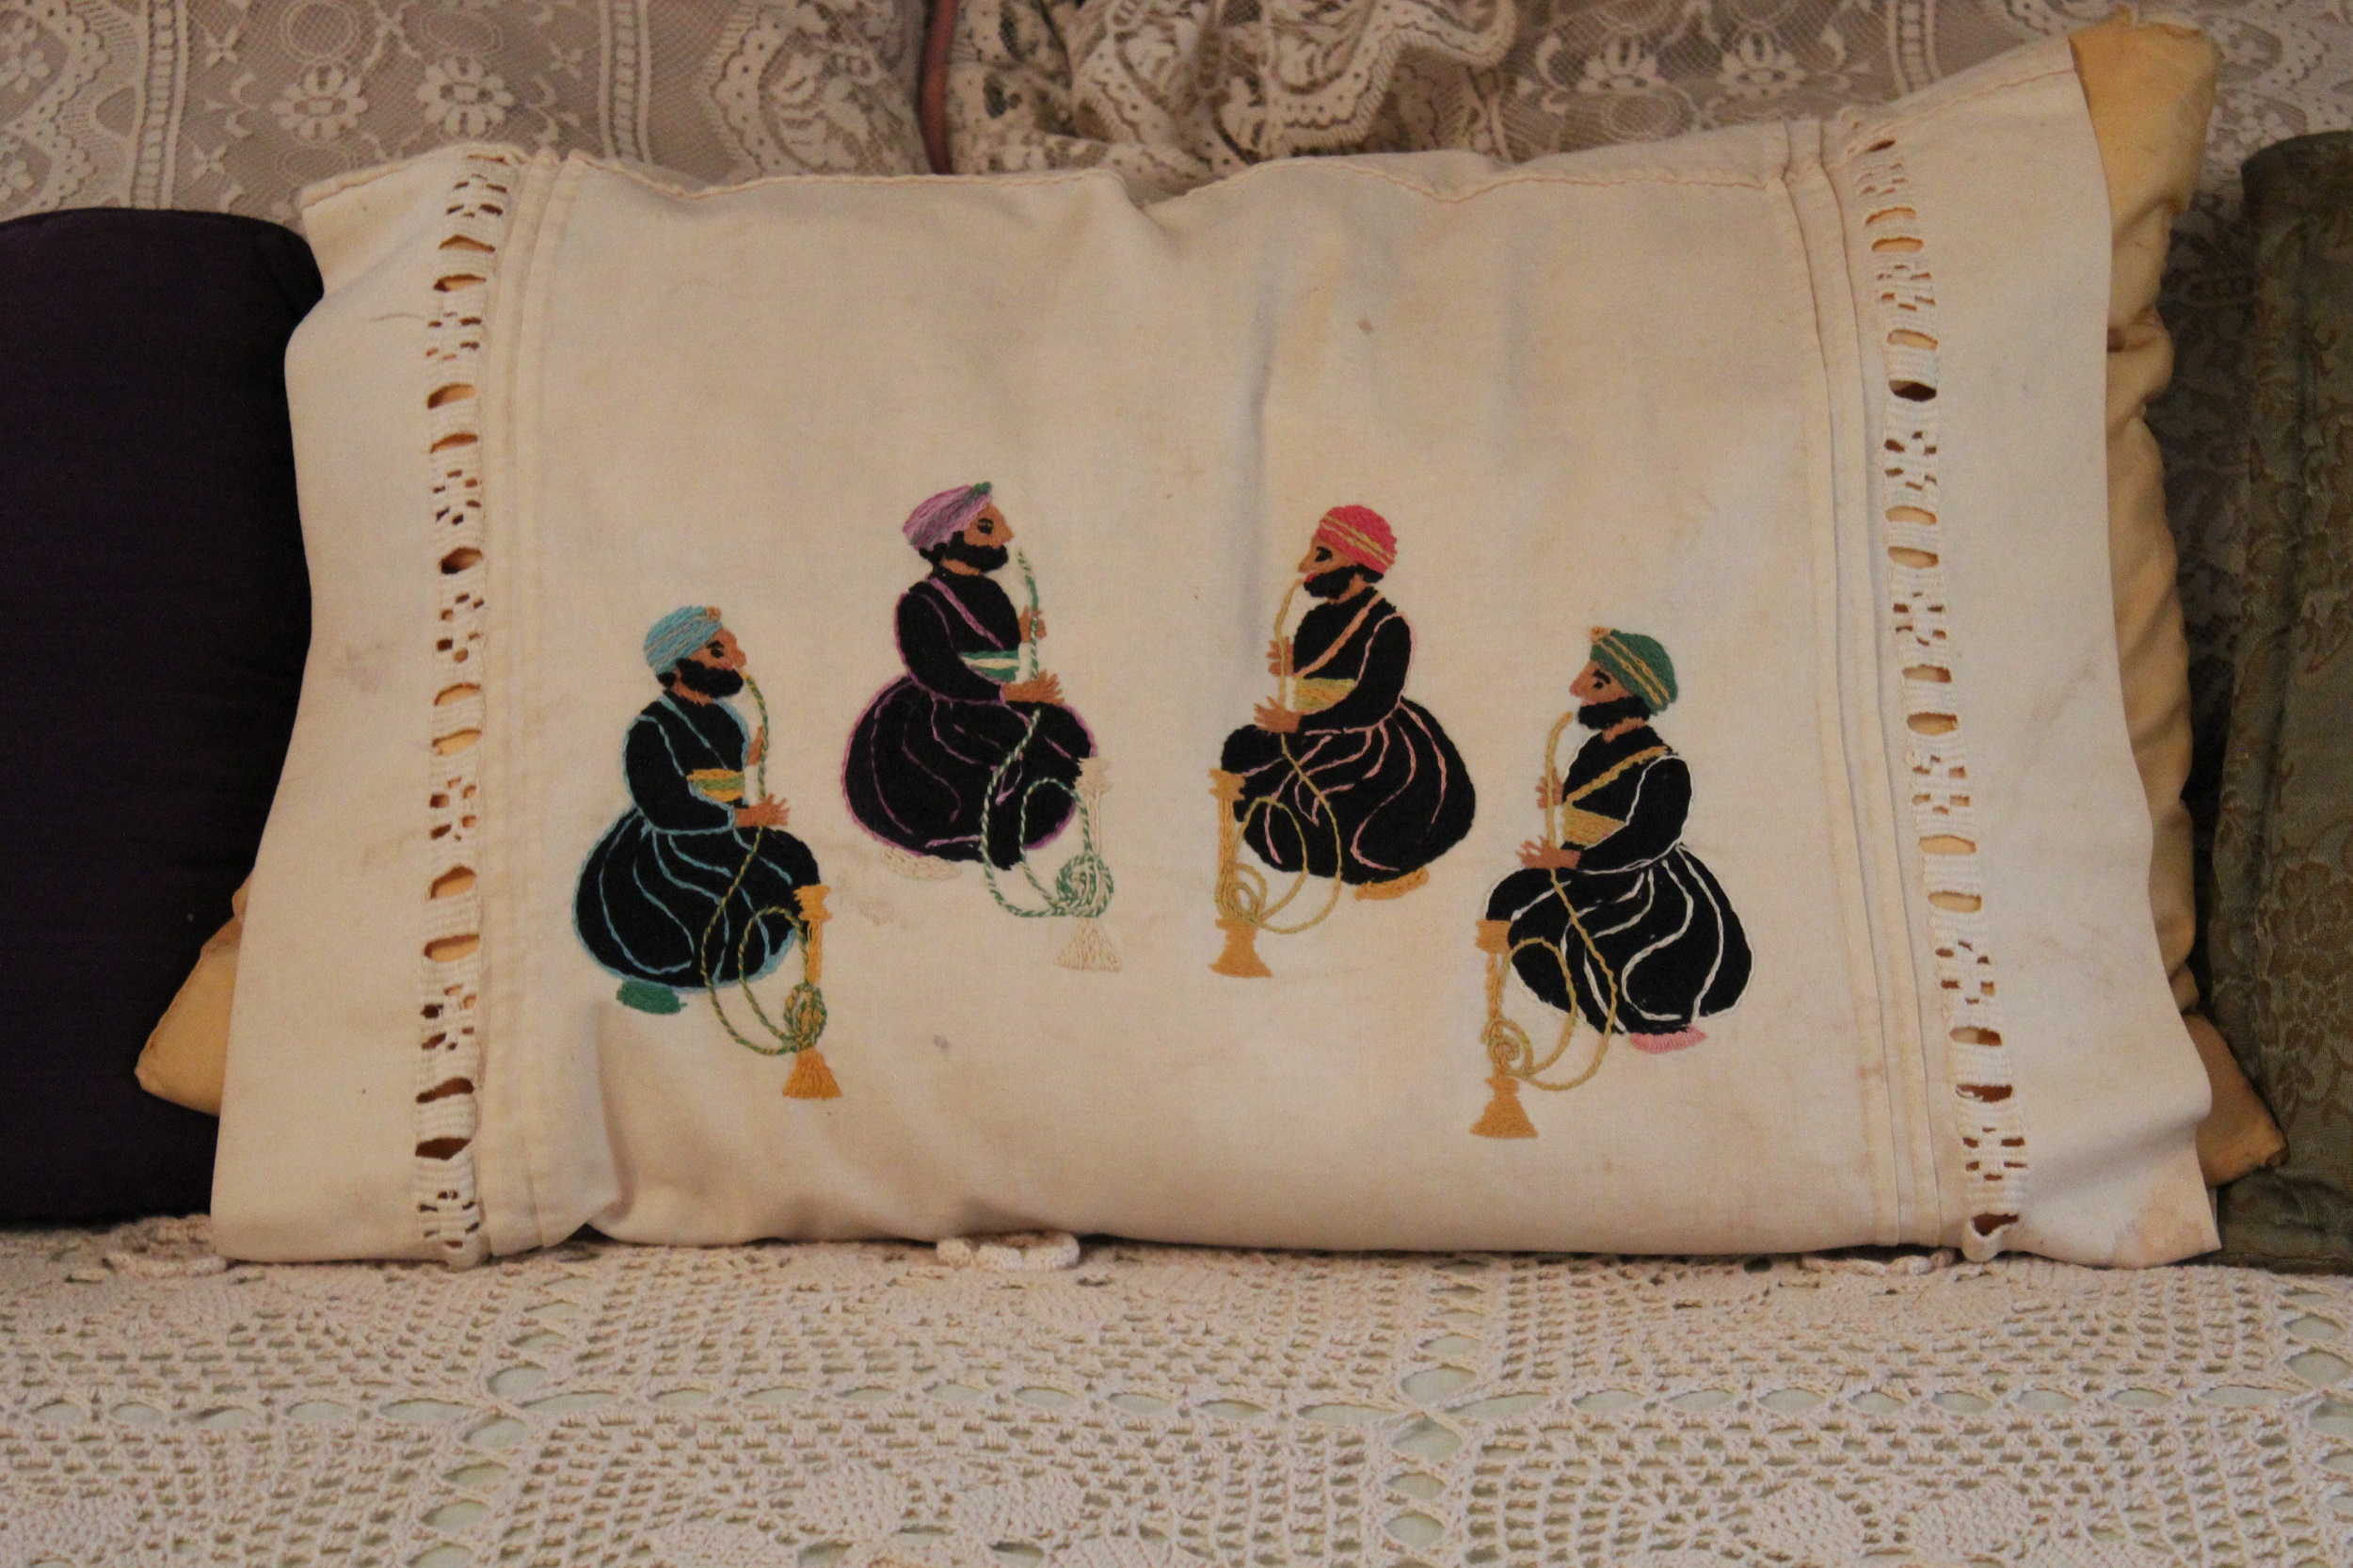 Pillowcase embroidered with four men in black robes and different-colored turbans smoking hookah pipes